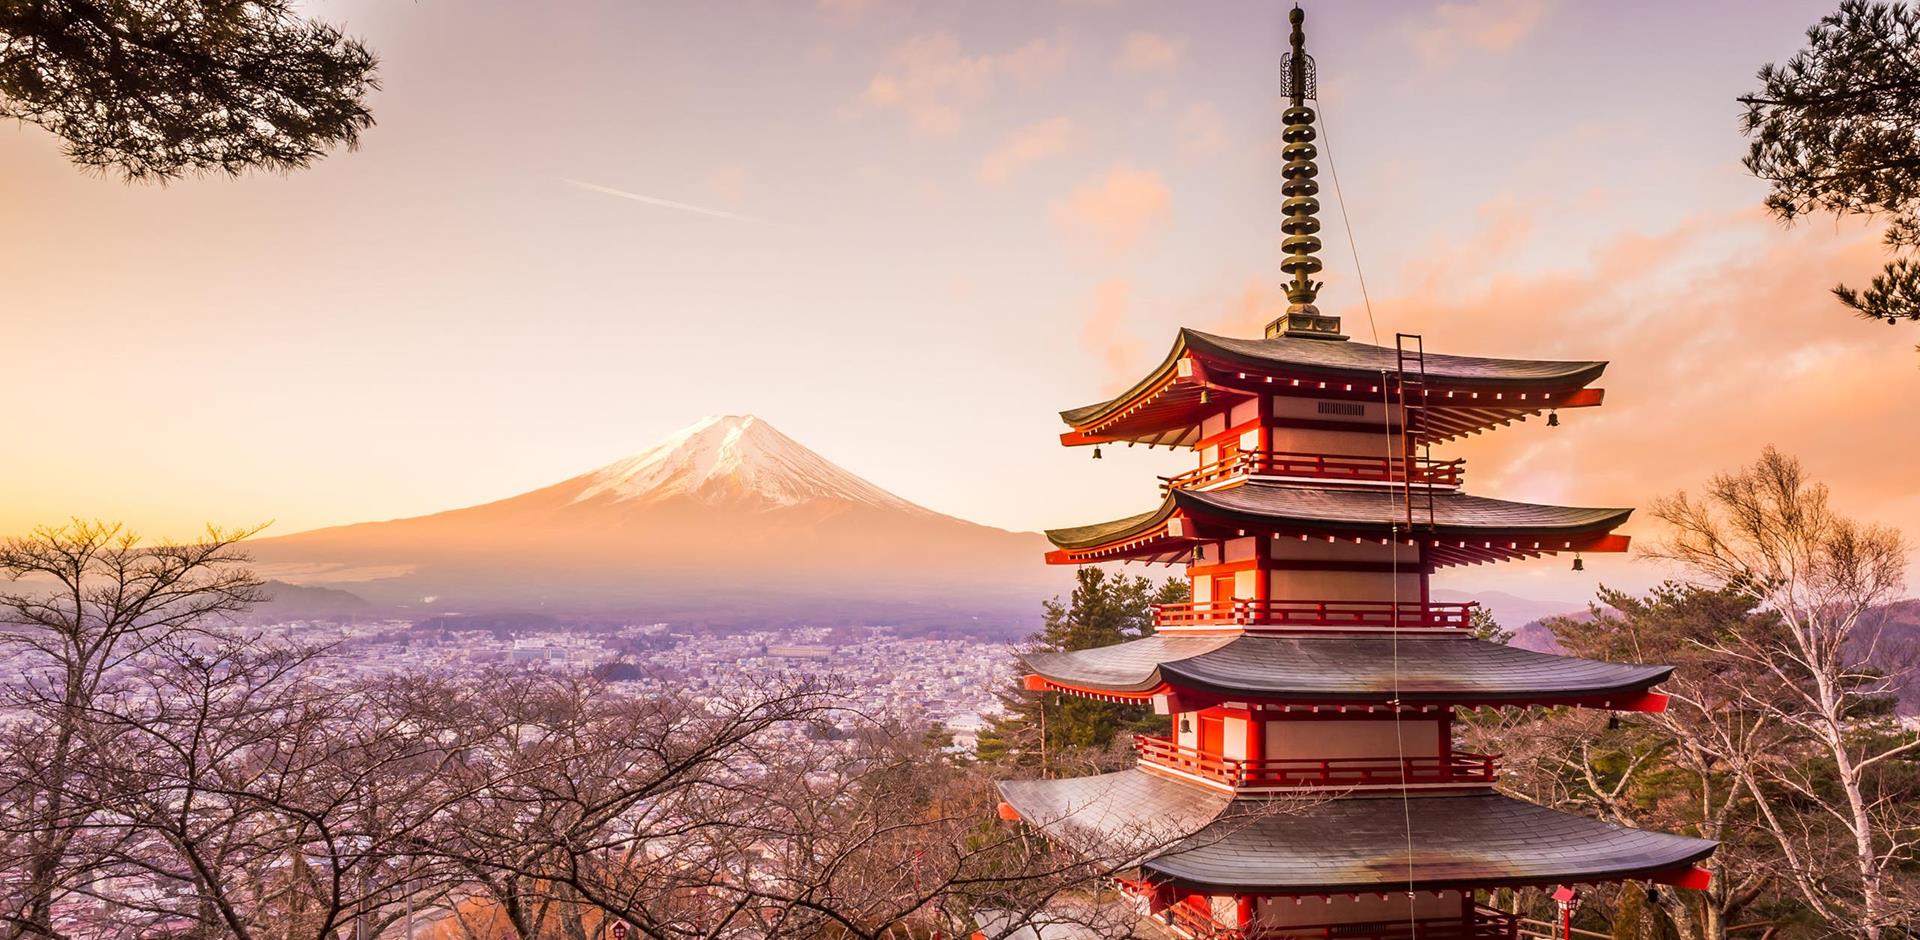 Mount Fuji, known as "Fujisan" in Japanese, is Japan's highest and most iconic mountain.